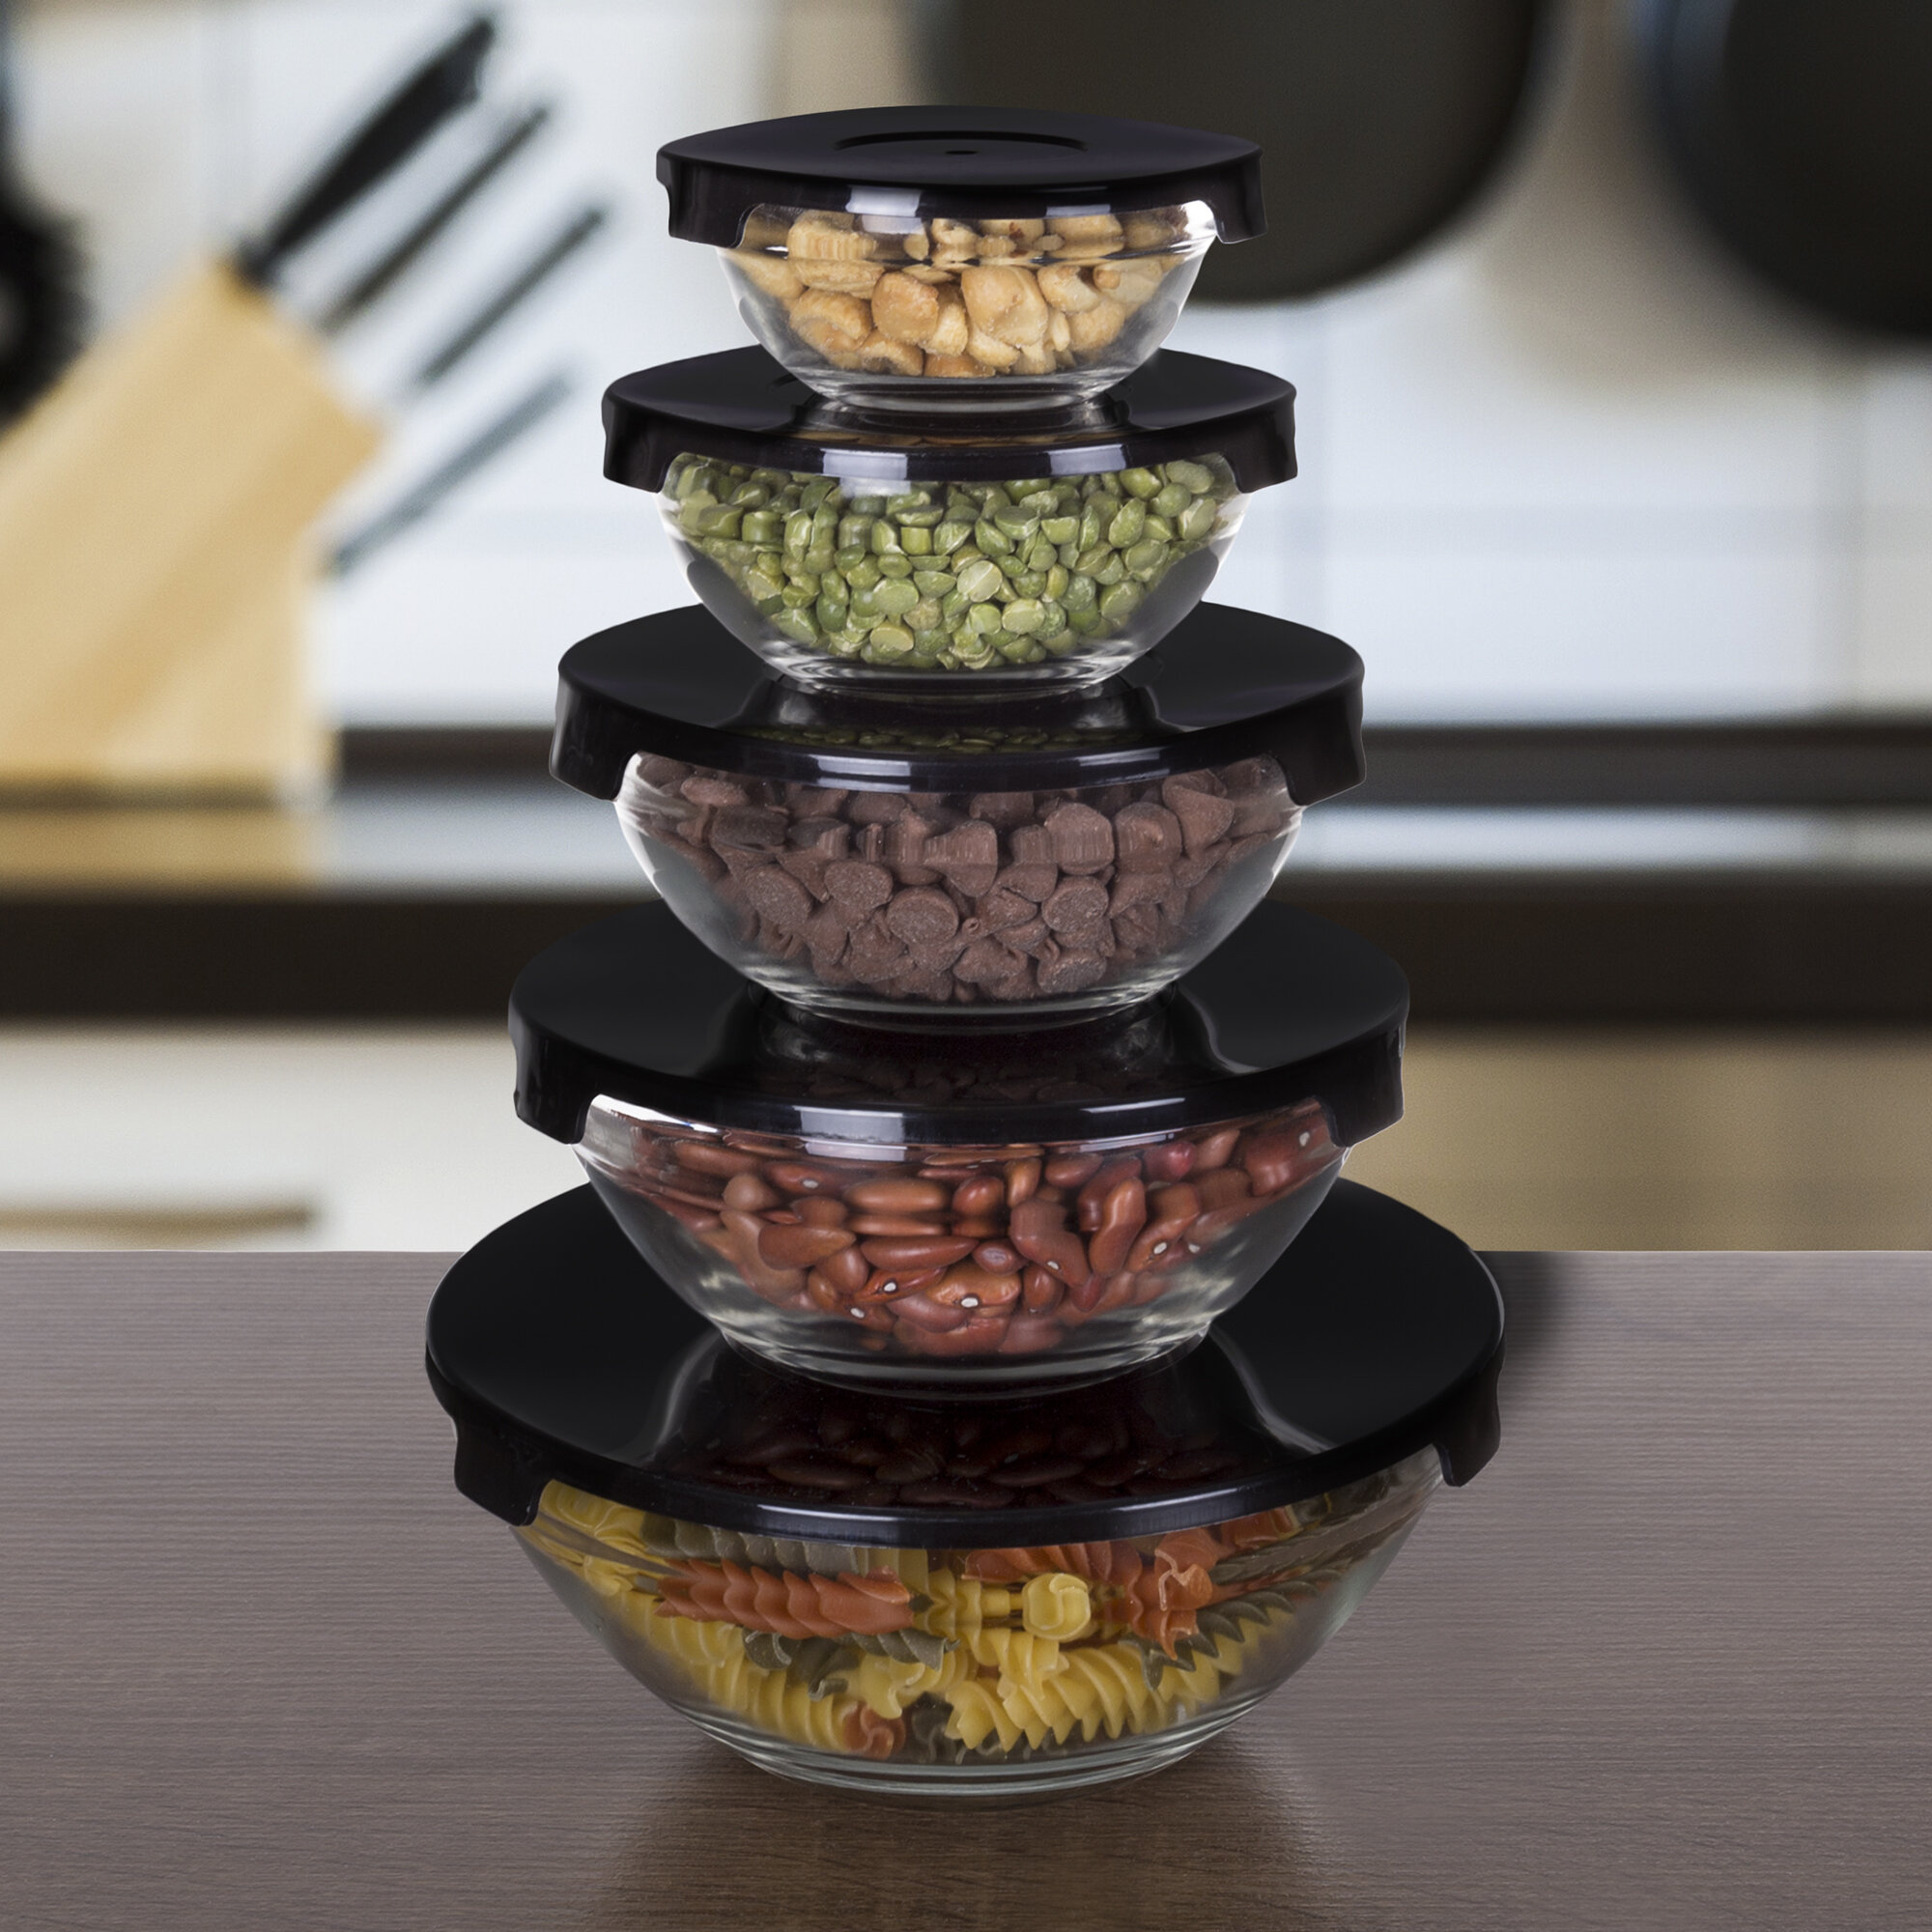 Glasslock 28-Pack Multisize Glass Bpa-free Reusable Food Storage